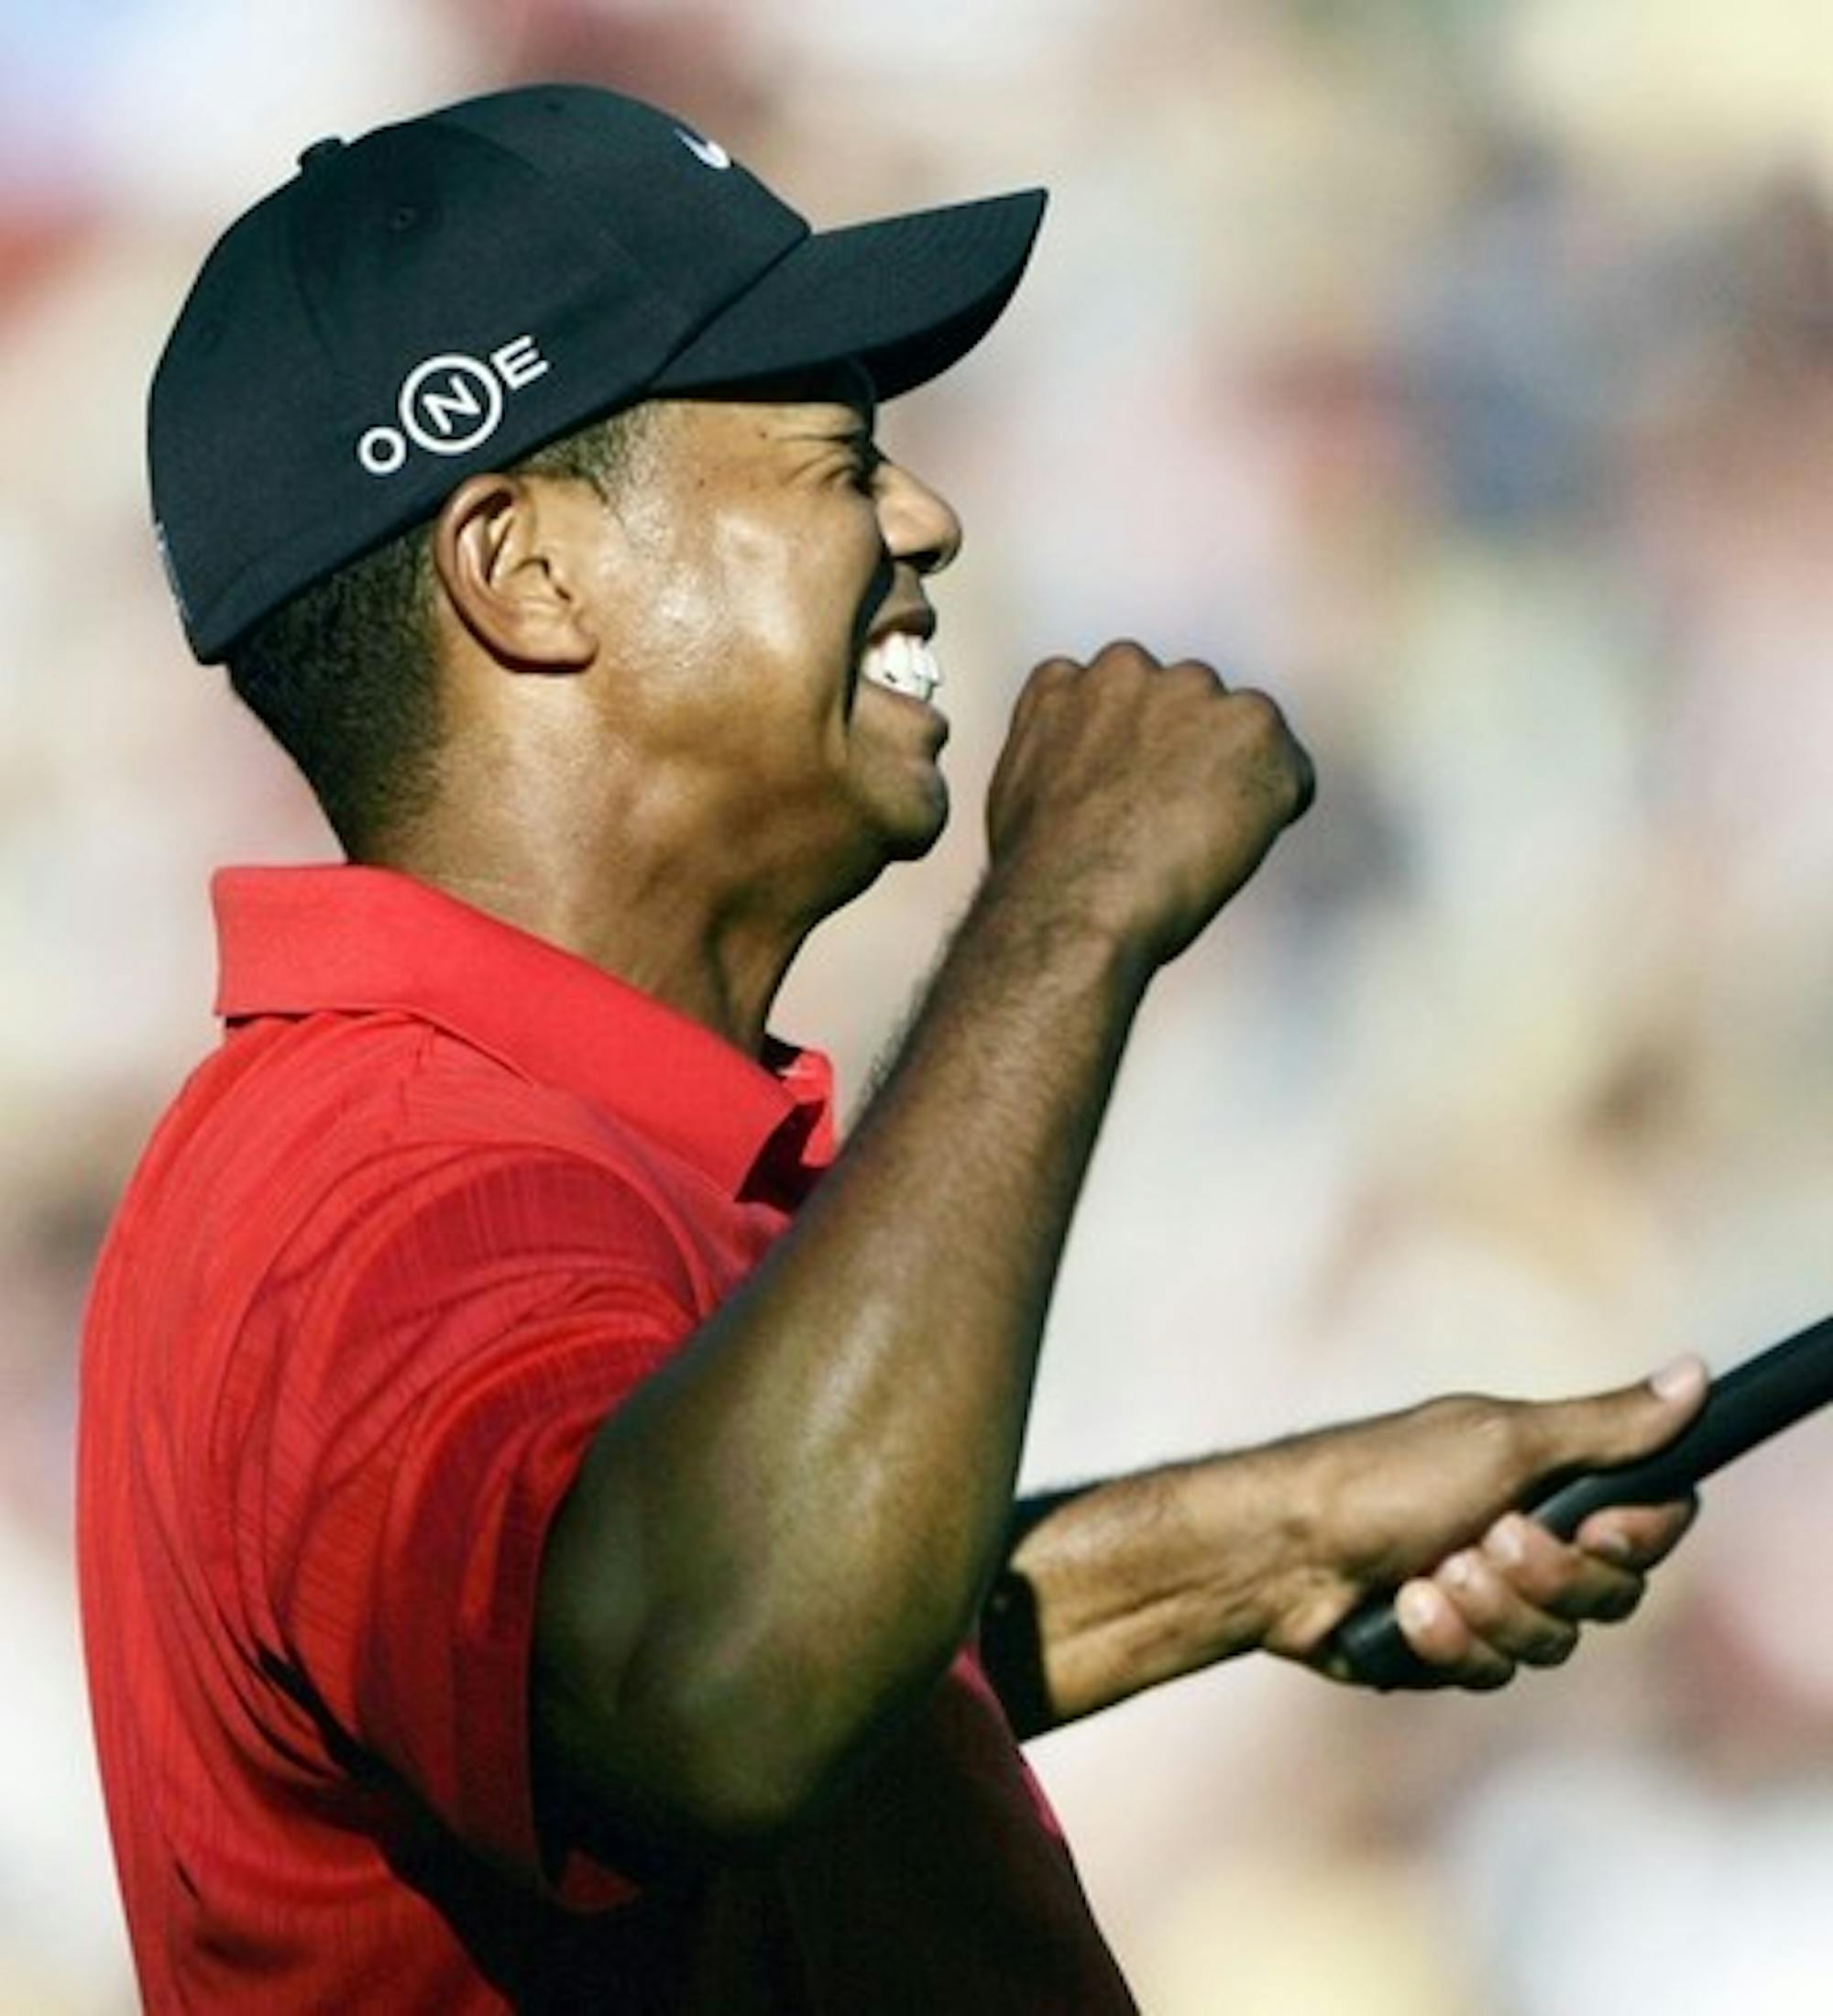 Tiger Woods celebrates after winning his 12th major tournament this past weekend at the PGA Championship held at Medinah Country Club.